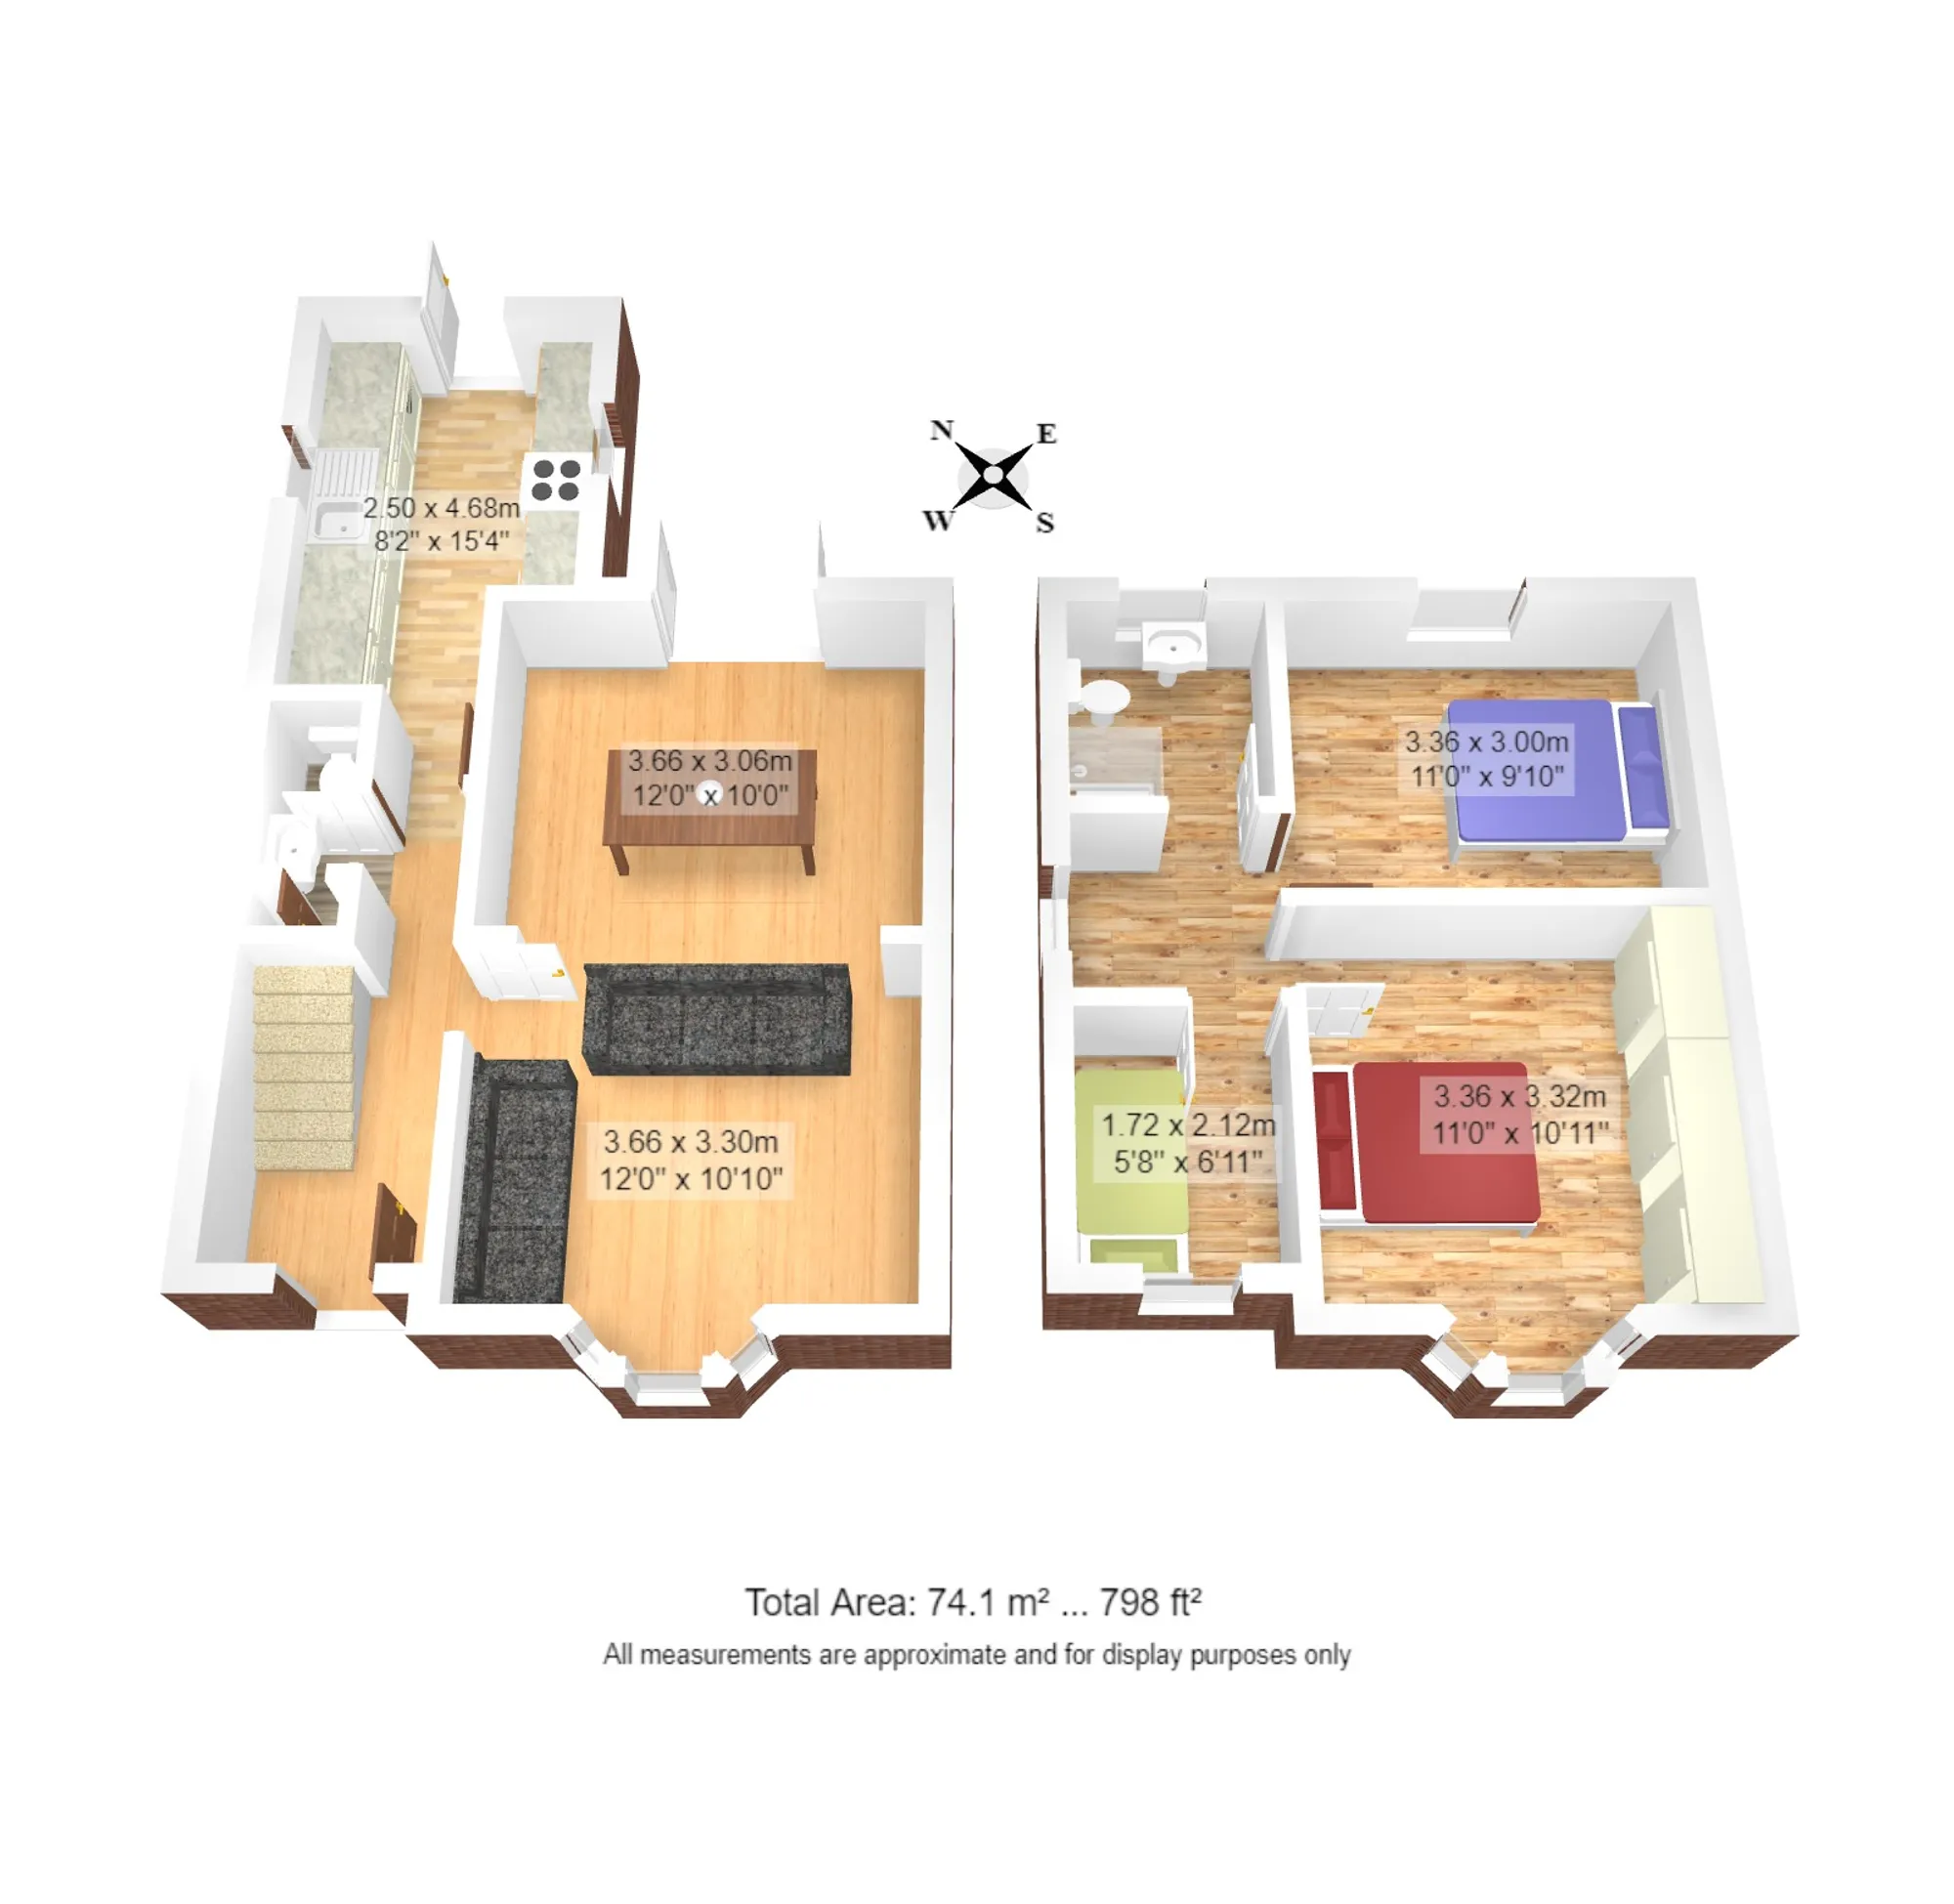 3 bed detached house for sale in Hampton Road, Manchester - Property floorplan